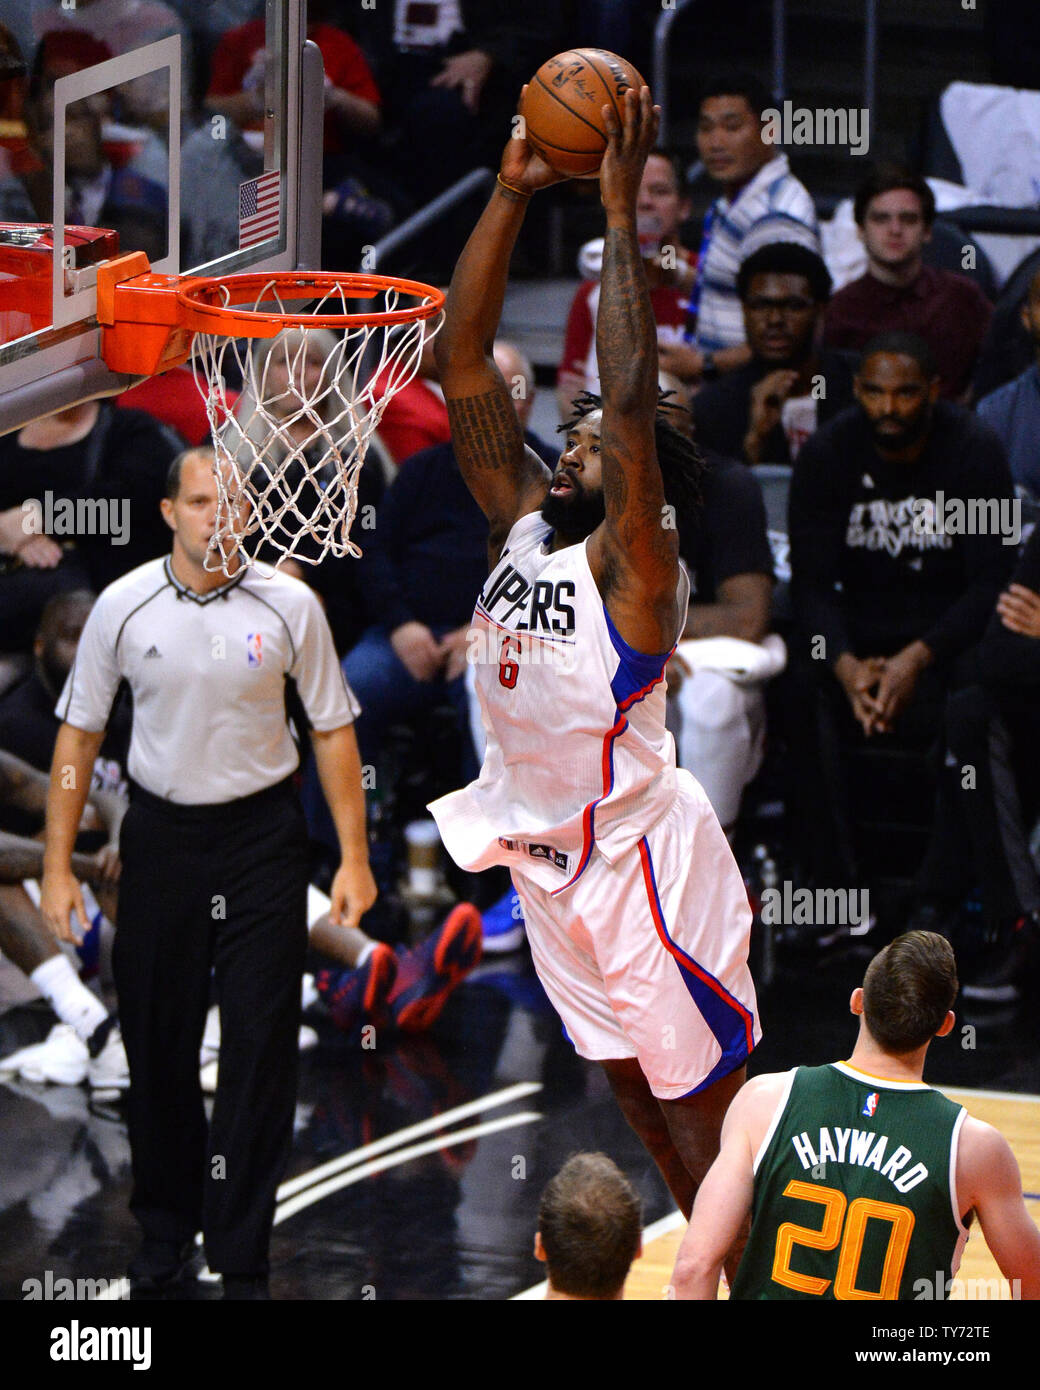 Clippers Center De Andre Jordan Dunks The Ball In Game 5 Of Their Best Of Seven Western Conference Playoff Series Against The Jazz At Staples Center In Los Angeles On April 25 17 The